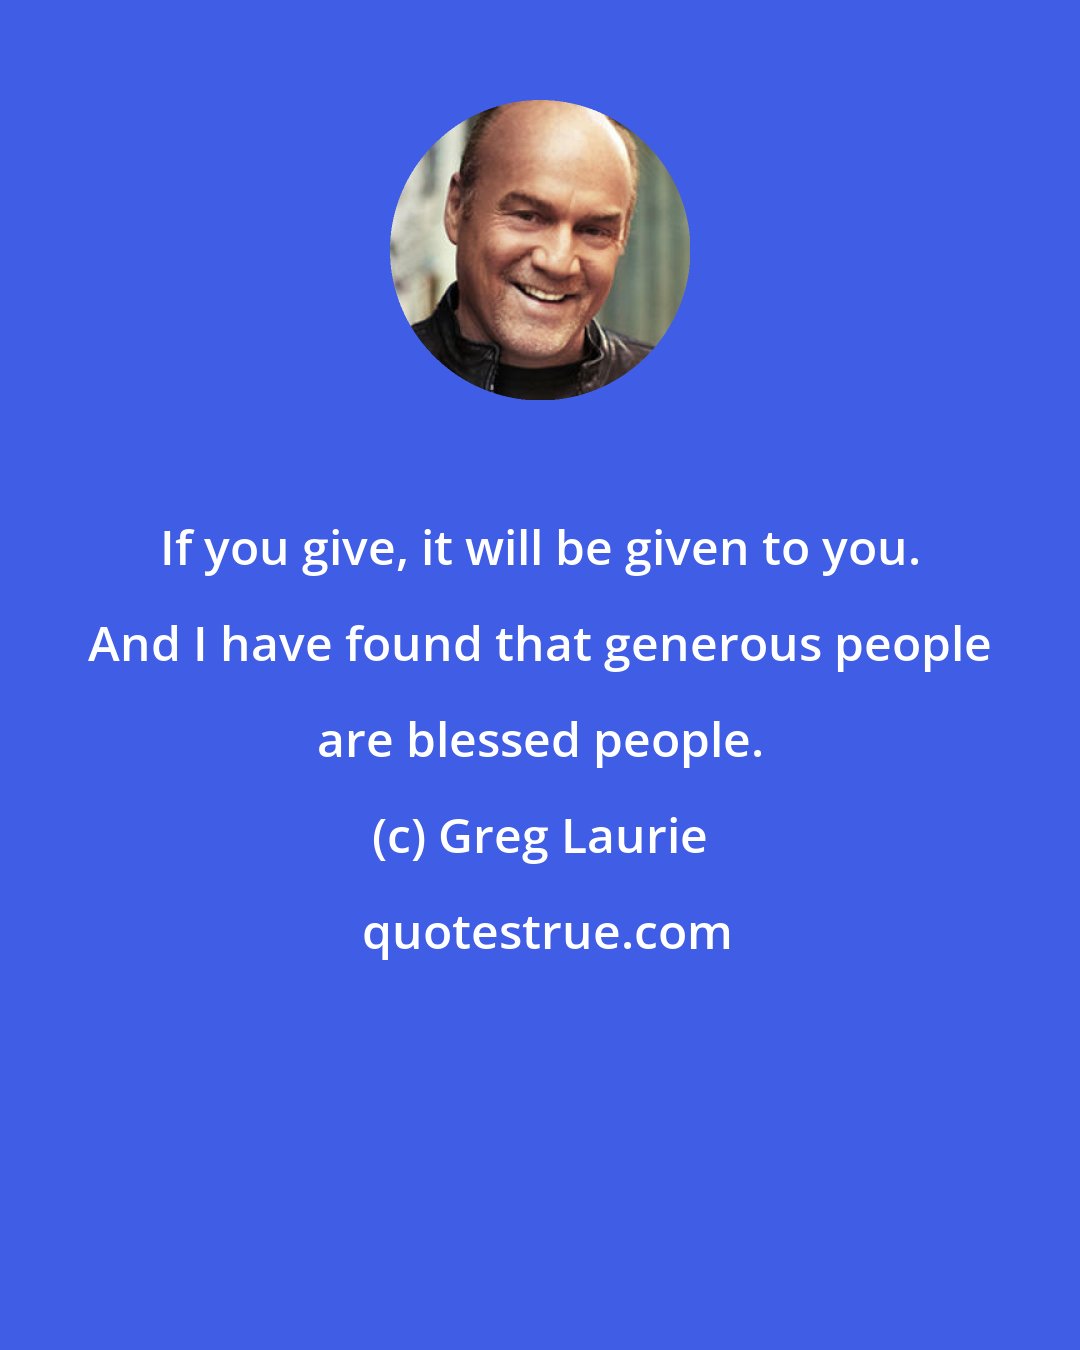 Greg Laurie: If you give, it will be given to you. And I have found that generous people are blessed people.